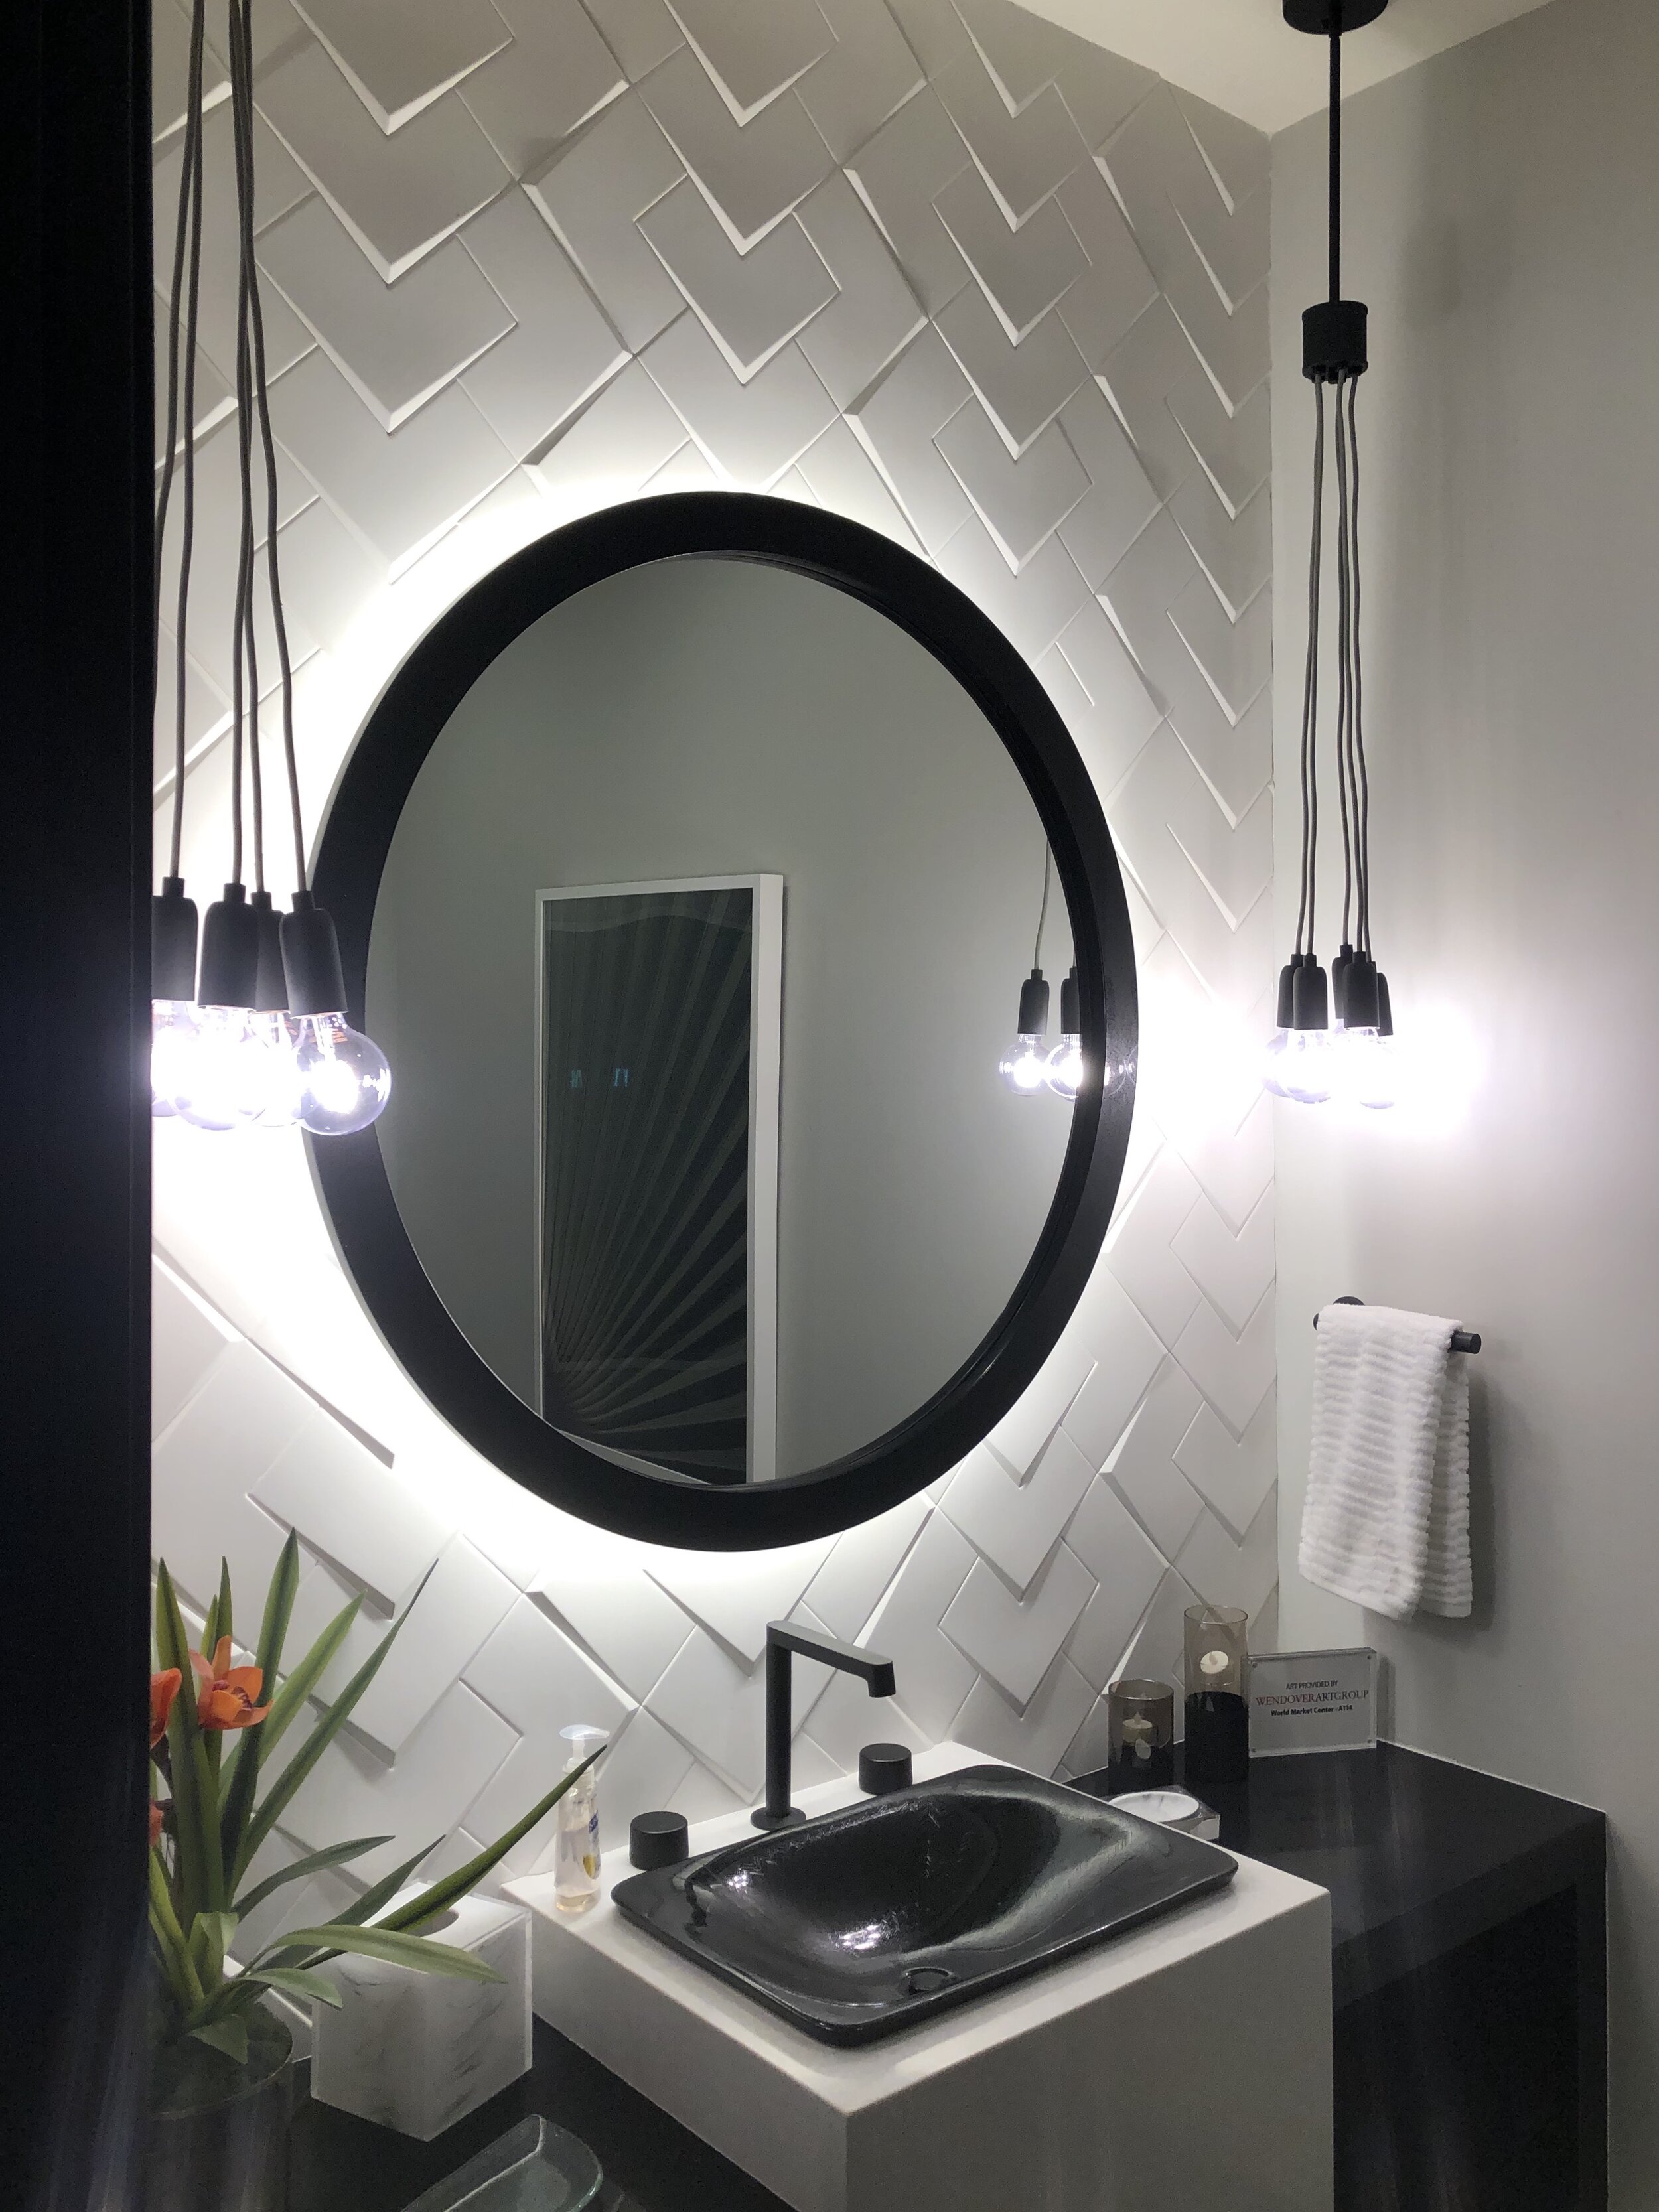 Pendant Lighting For Bathroom Vanity - All About Pendant Lights This